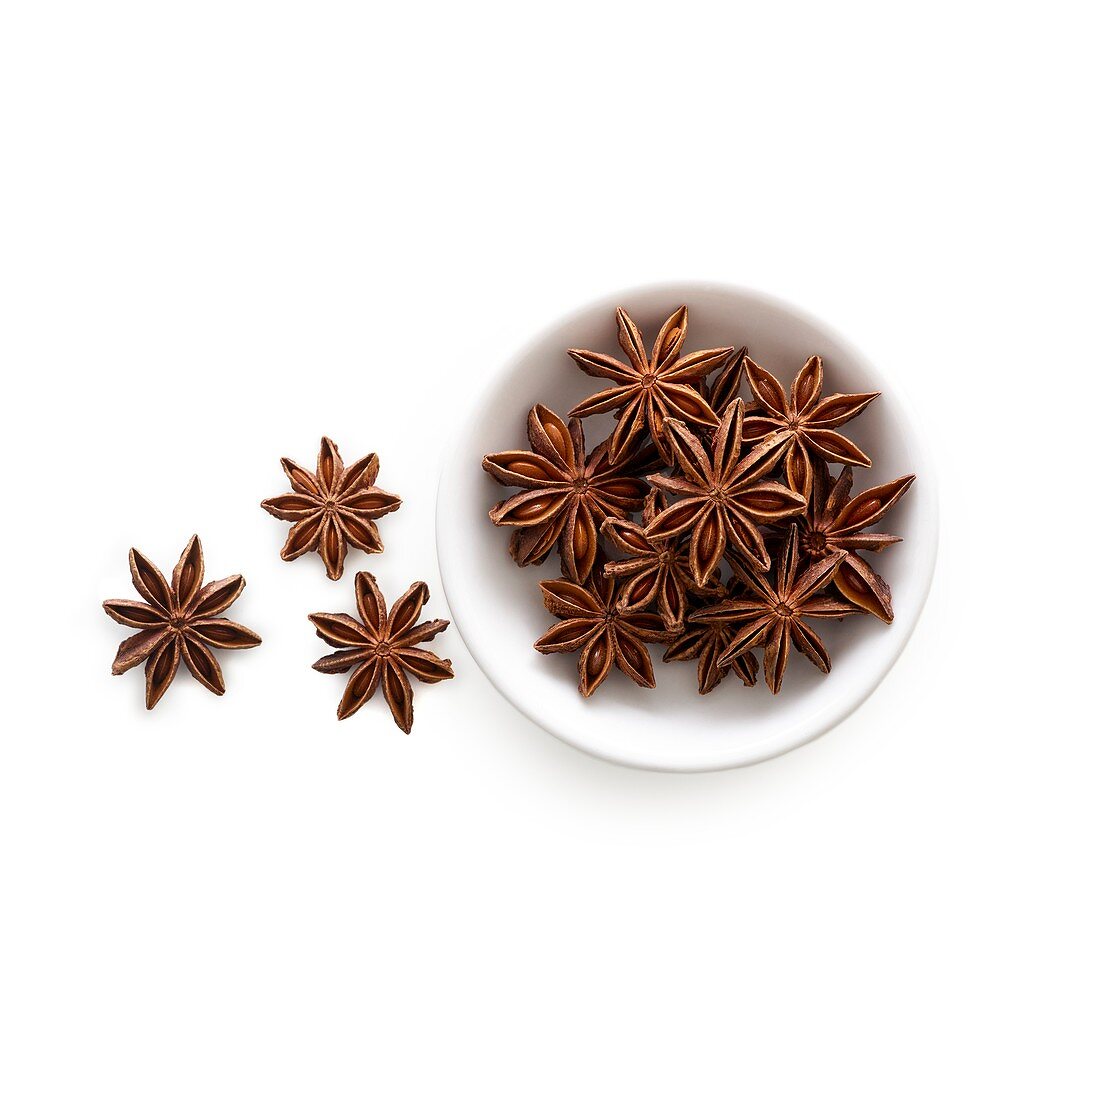 Star anise in white bowl